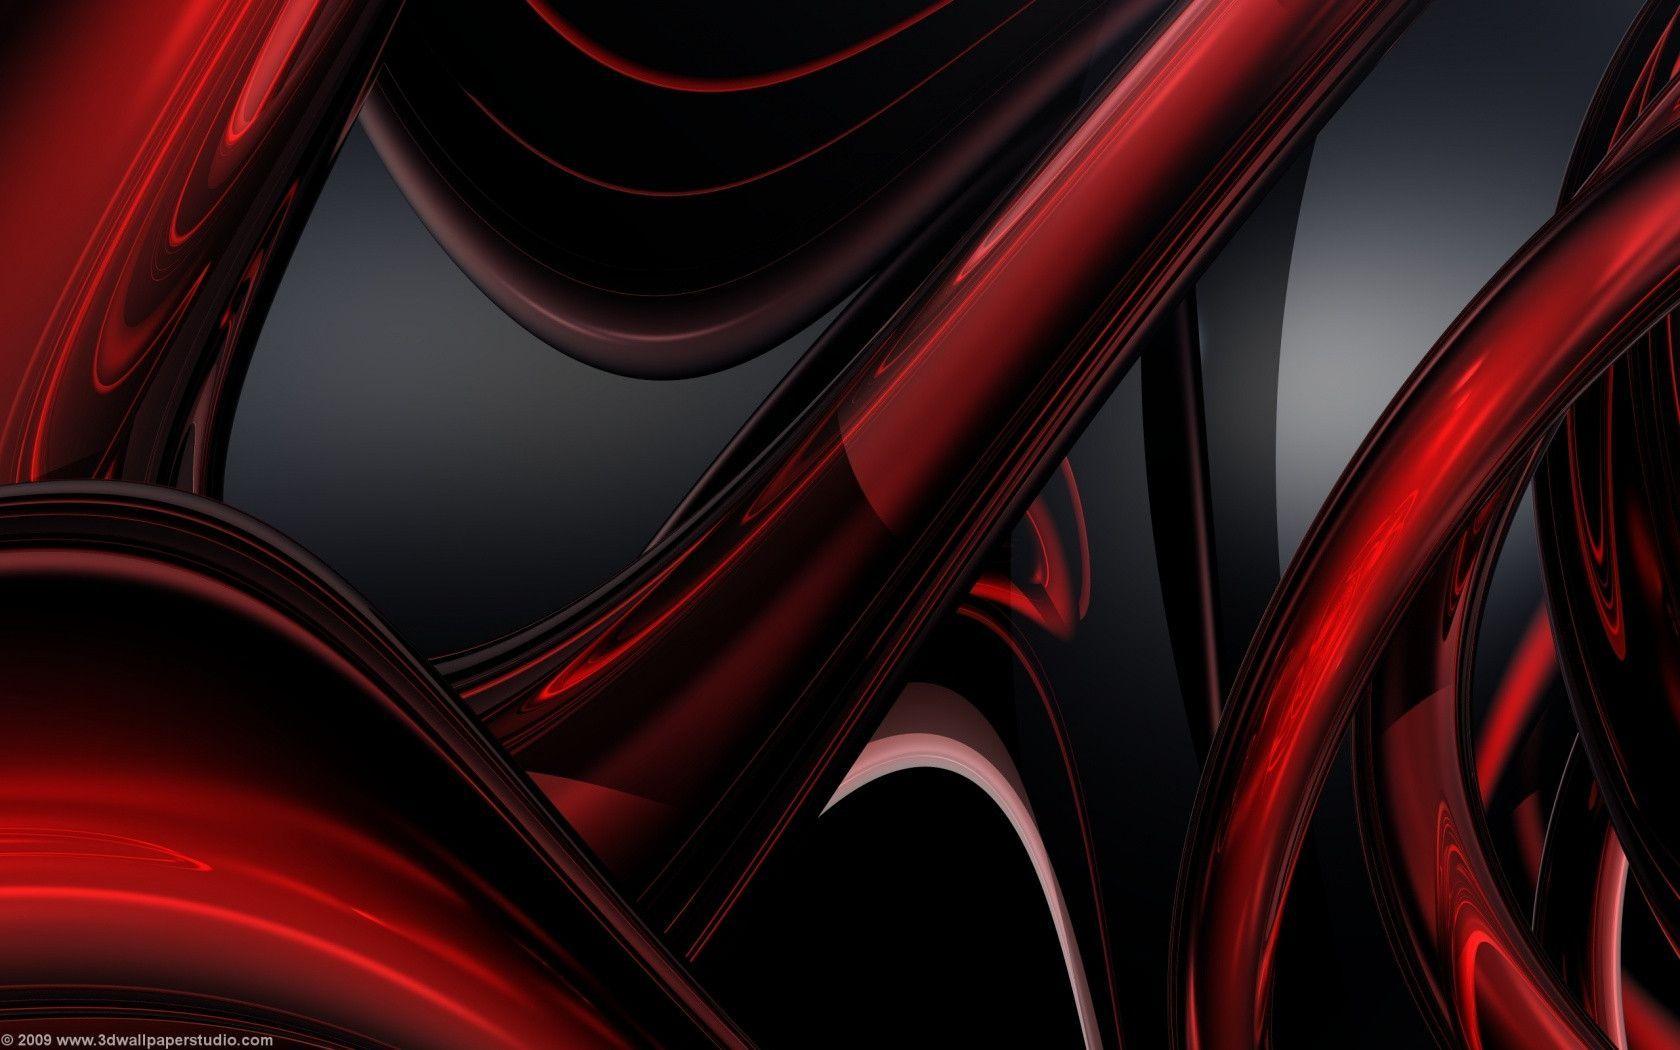 Black And Red Abstract 9681 HD Wallpaper. Areahd